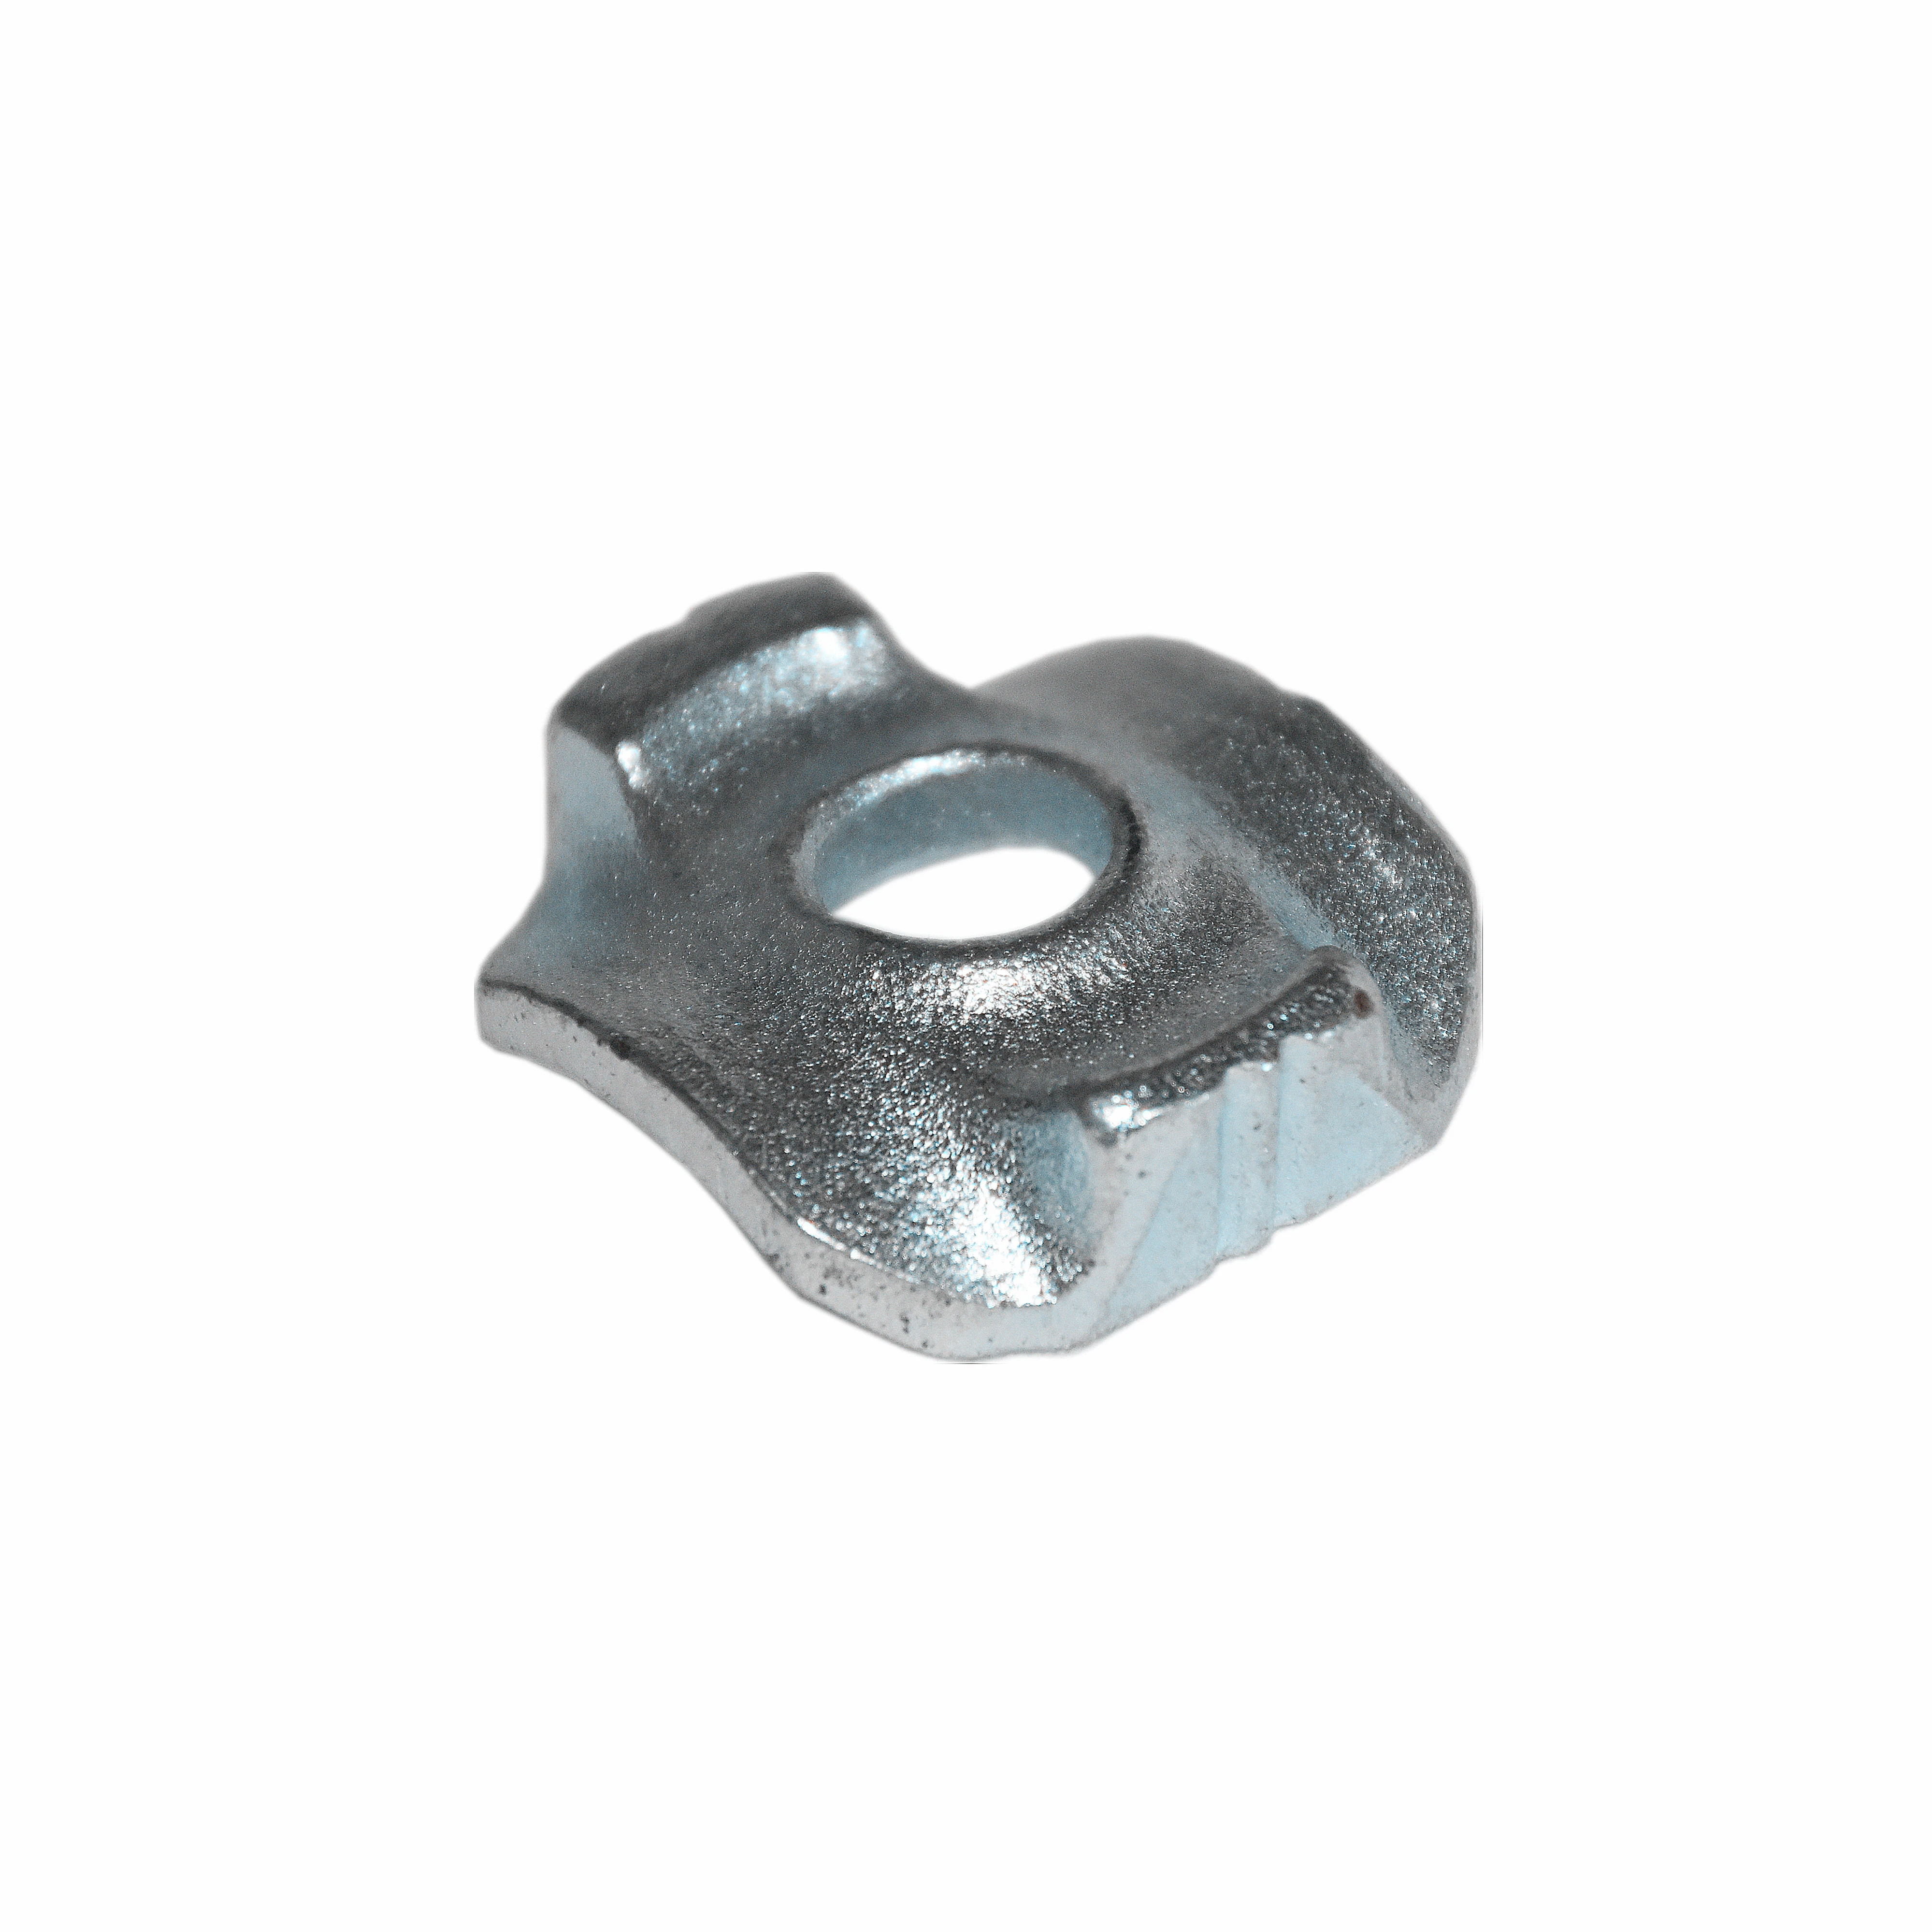 Precision high quality alloy steel stainless steel forging parts and accessories